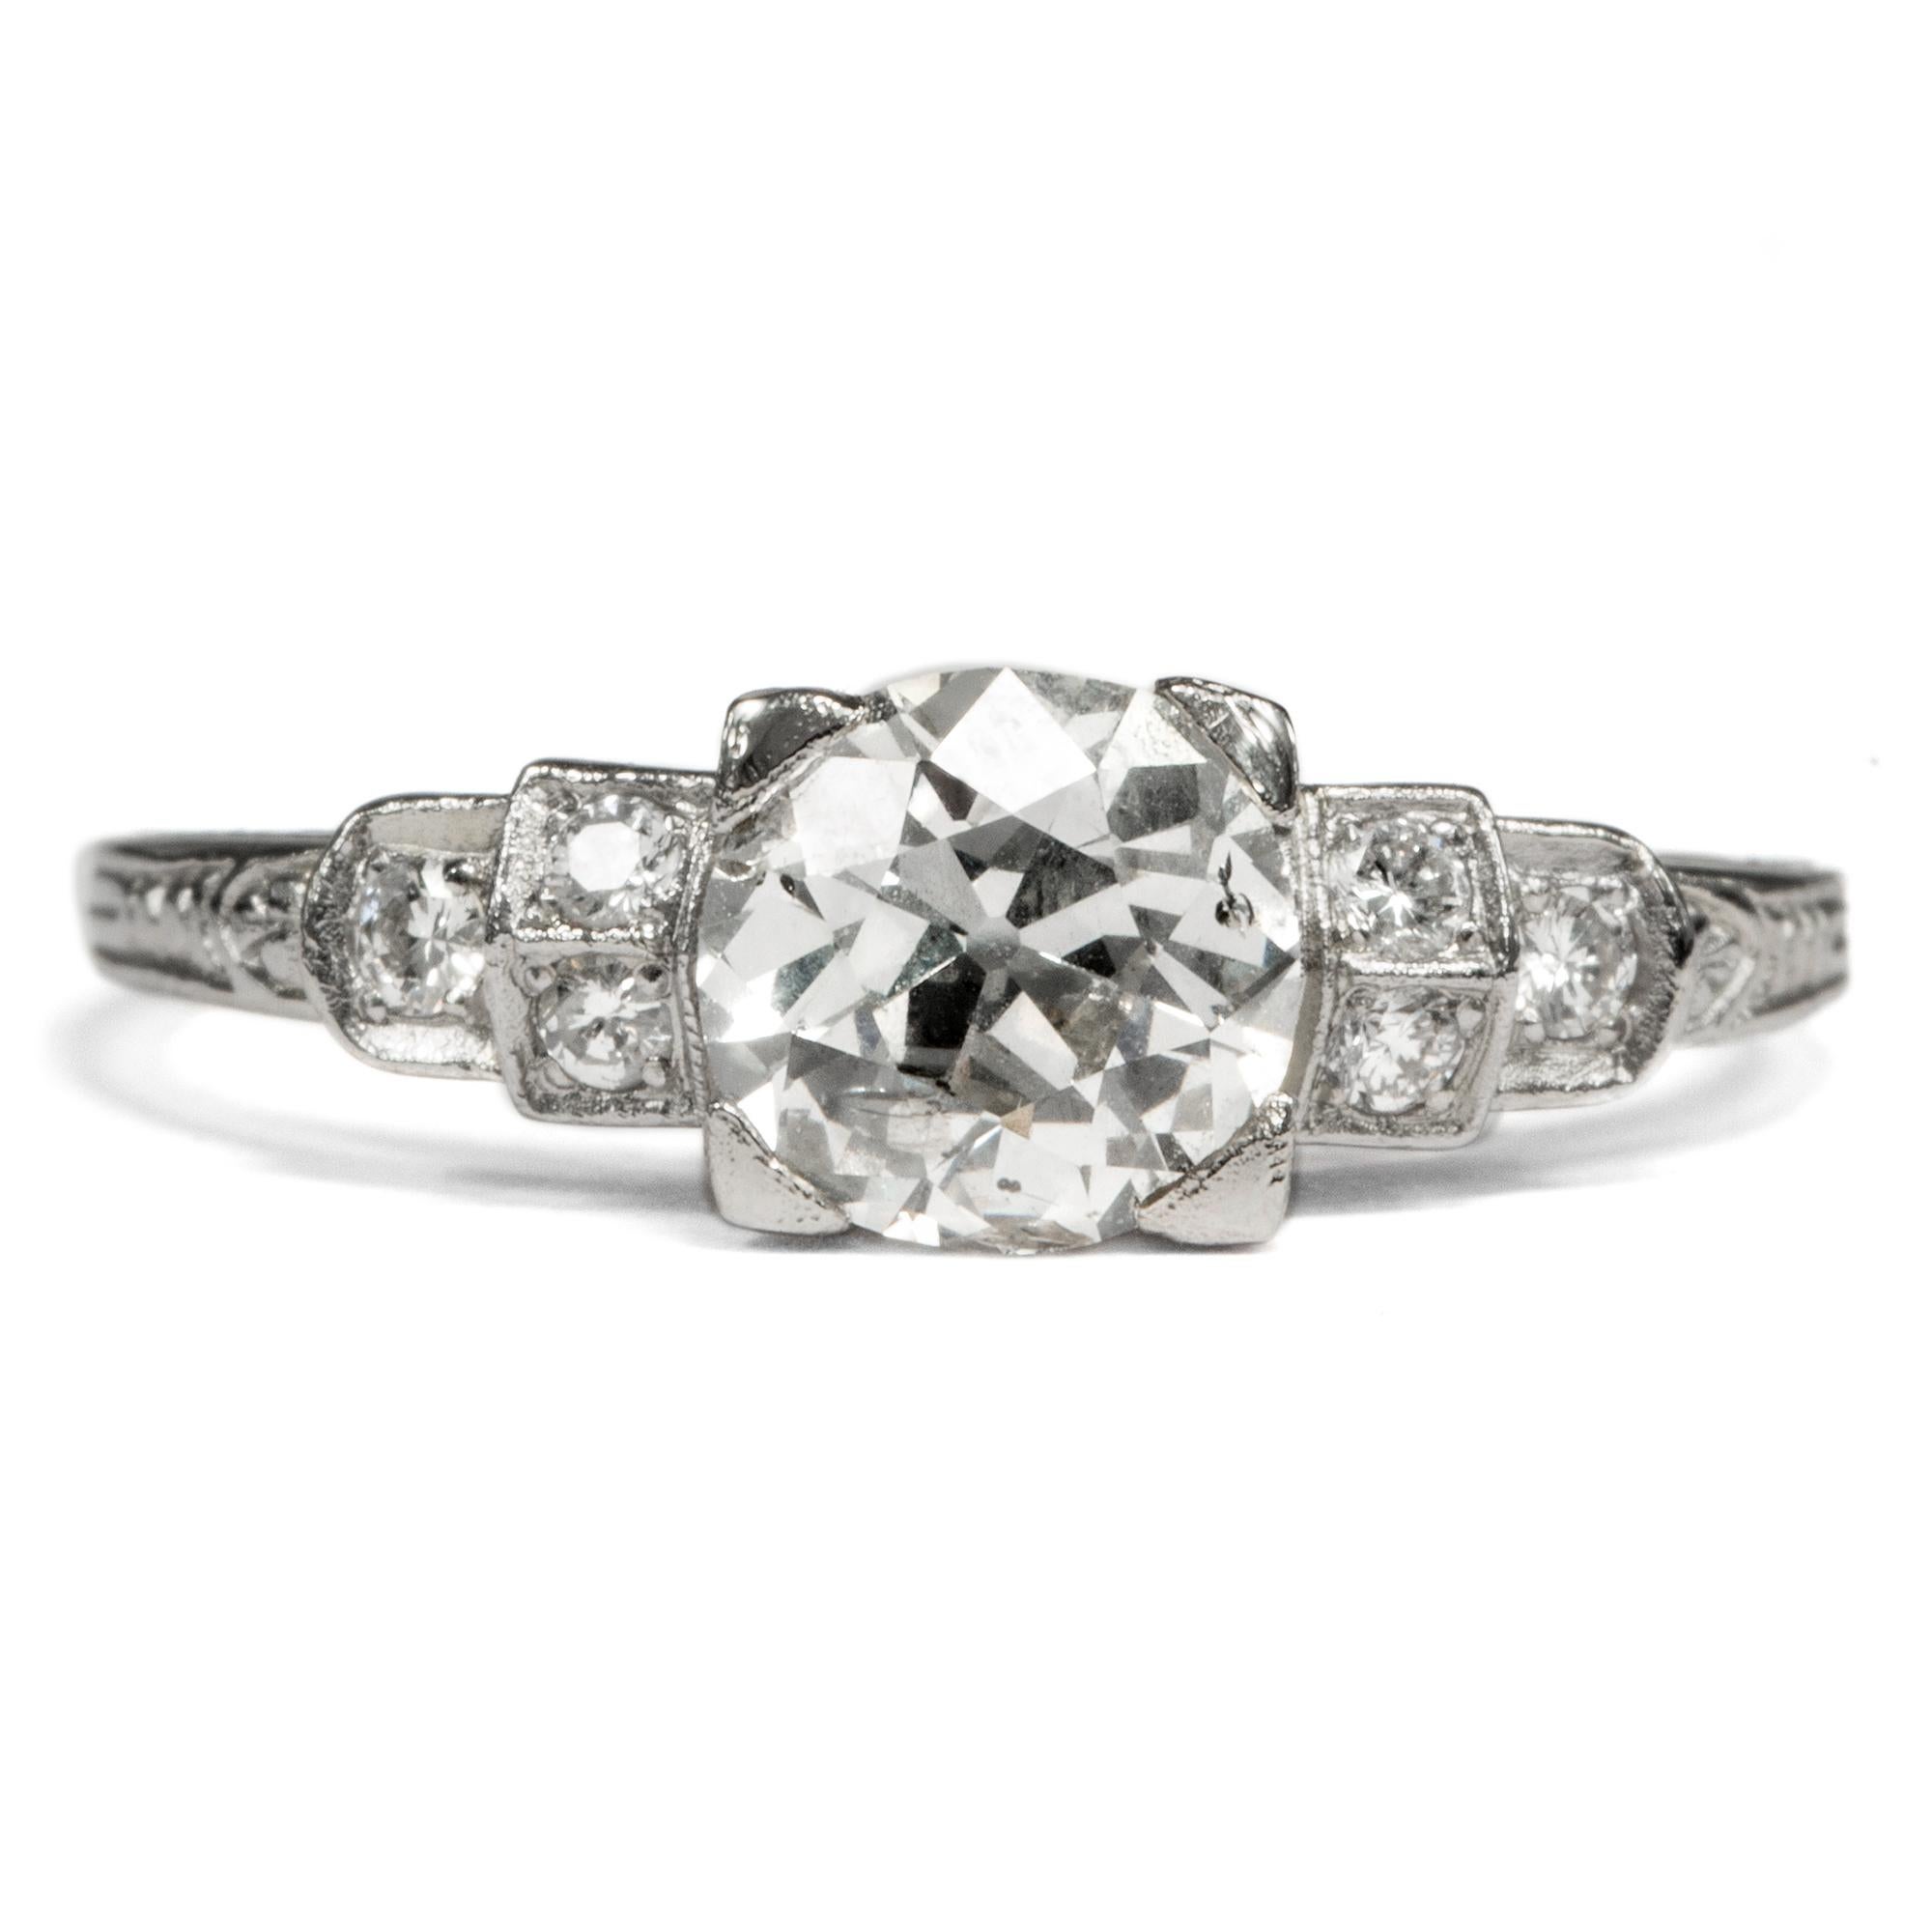 As purveyors of fine antique jewels, many antique engagement rings have passed through our hands. Their fine detailing and craftsmanship have inspired this piece, an engagement ring for those who enjoy the aesthetic of antique rings, yet prefer a